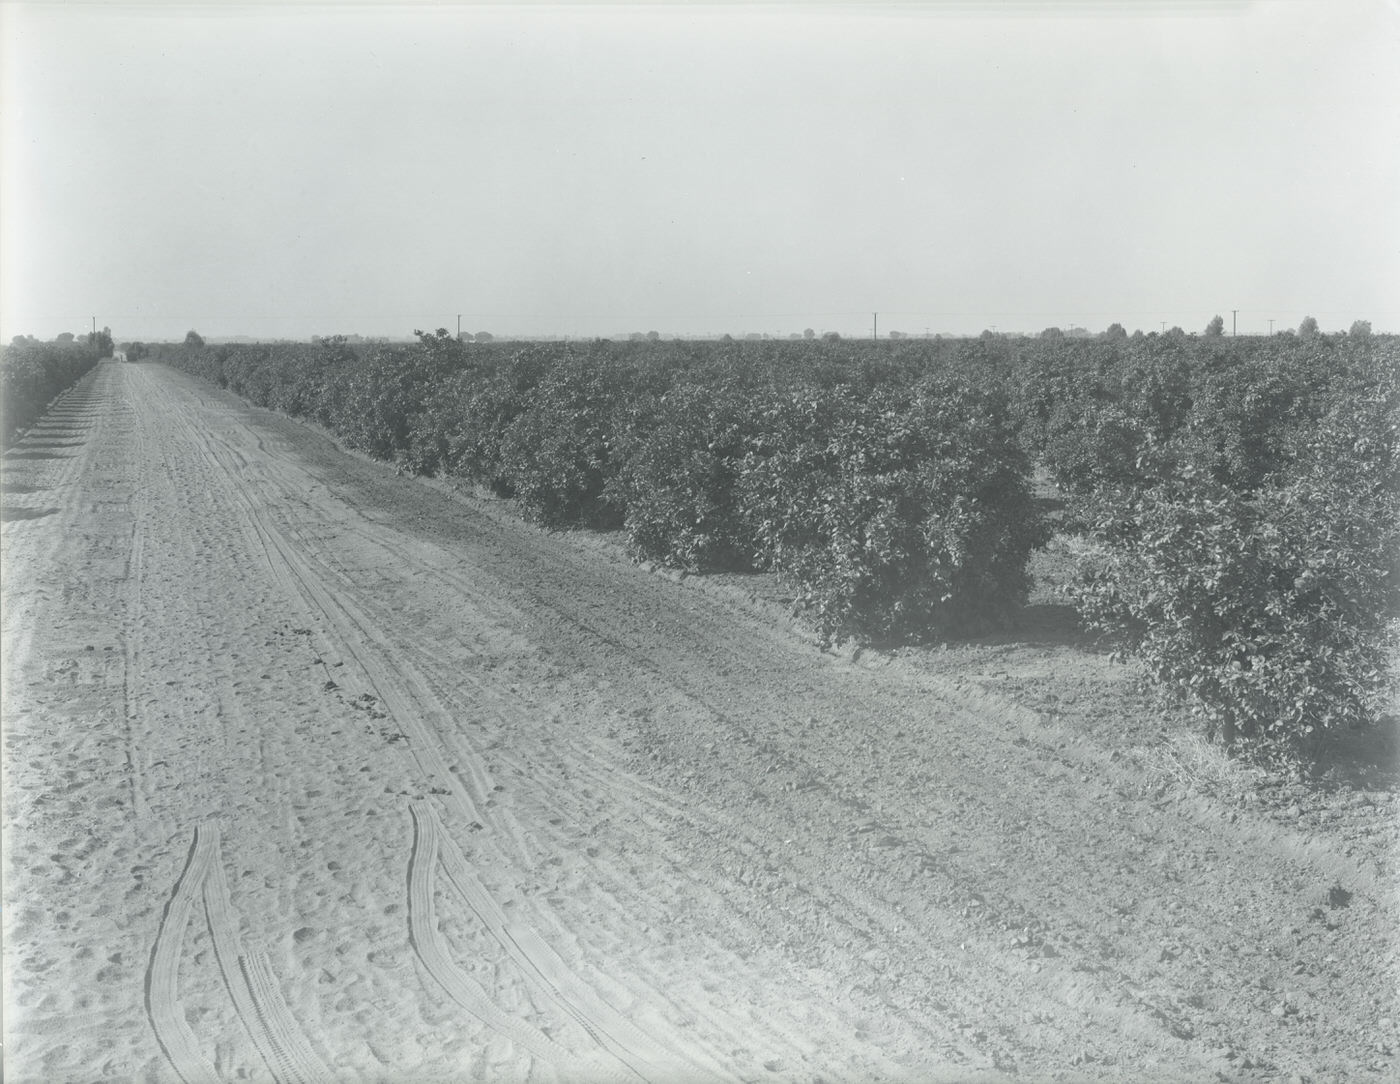 Salim Ackel Citrus Grove. This grove was located approximately eight miles northeast of Mesa and covered 282 acres in 1945.